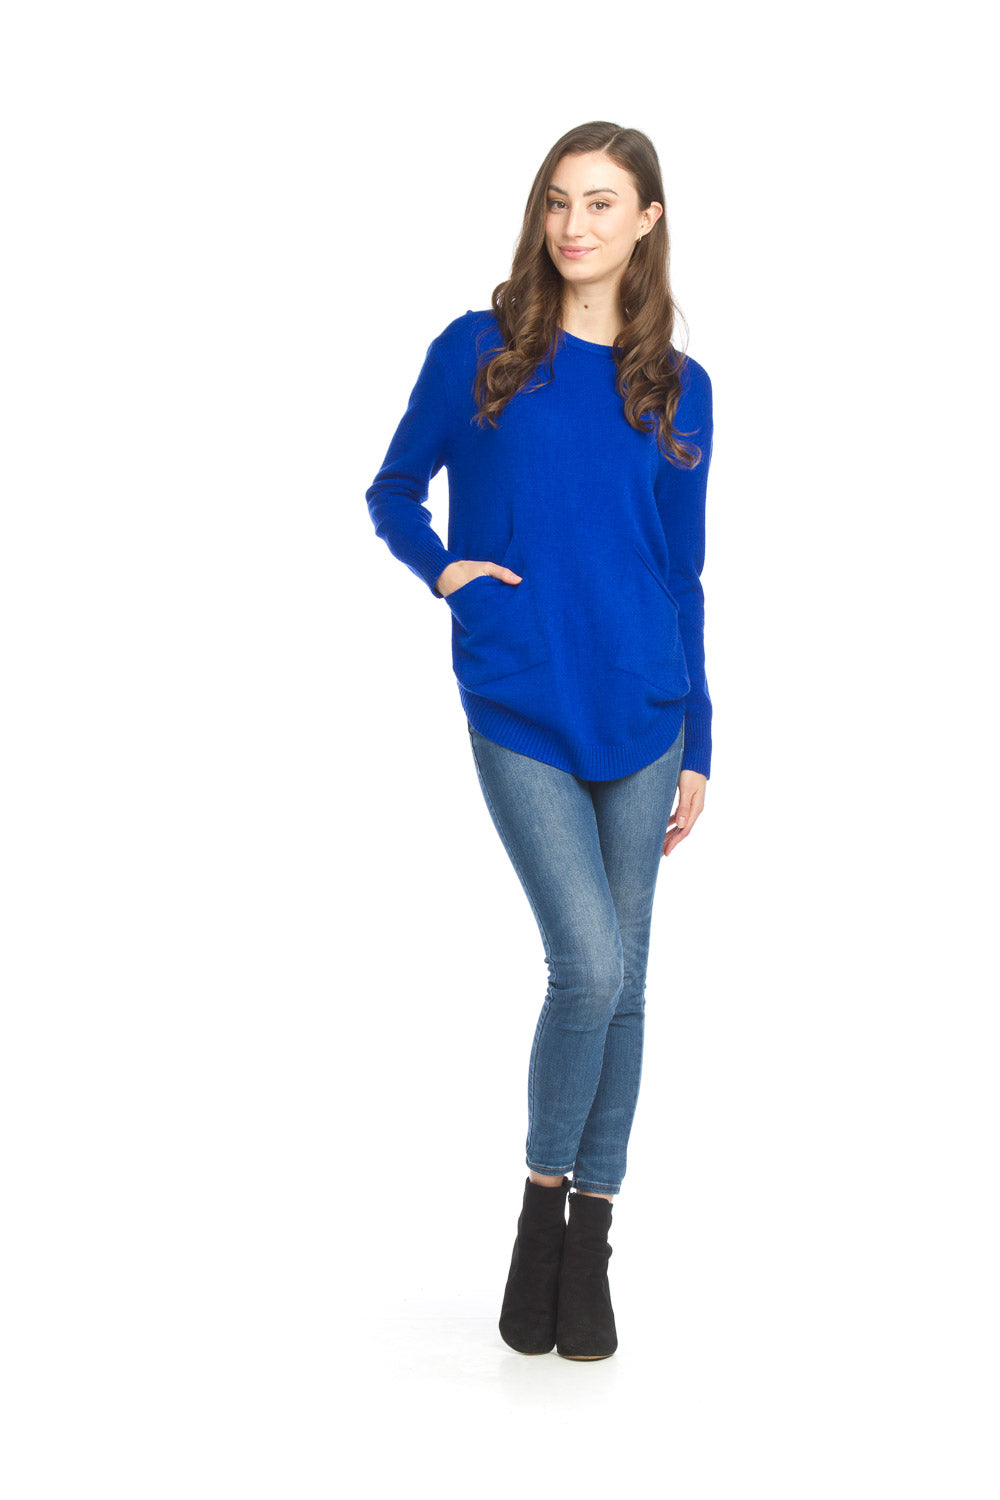 ST-06249 - Sweater Tunic with Rounded Hem and Pockets